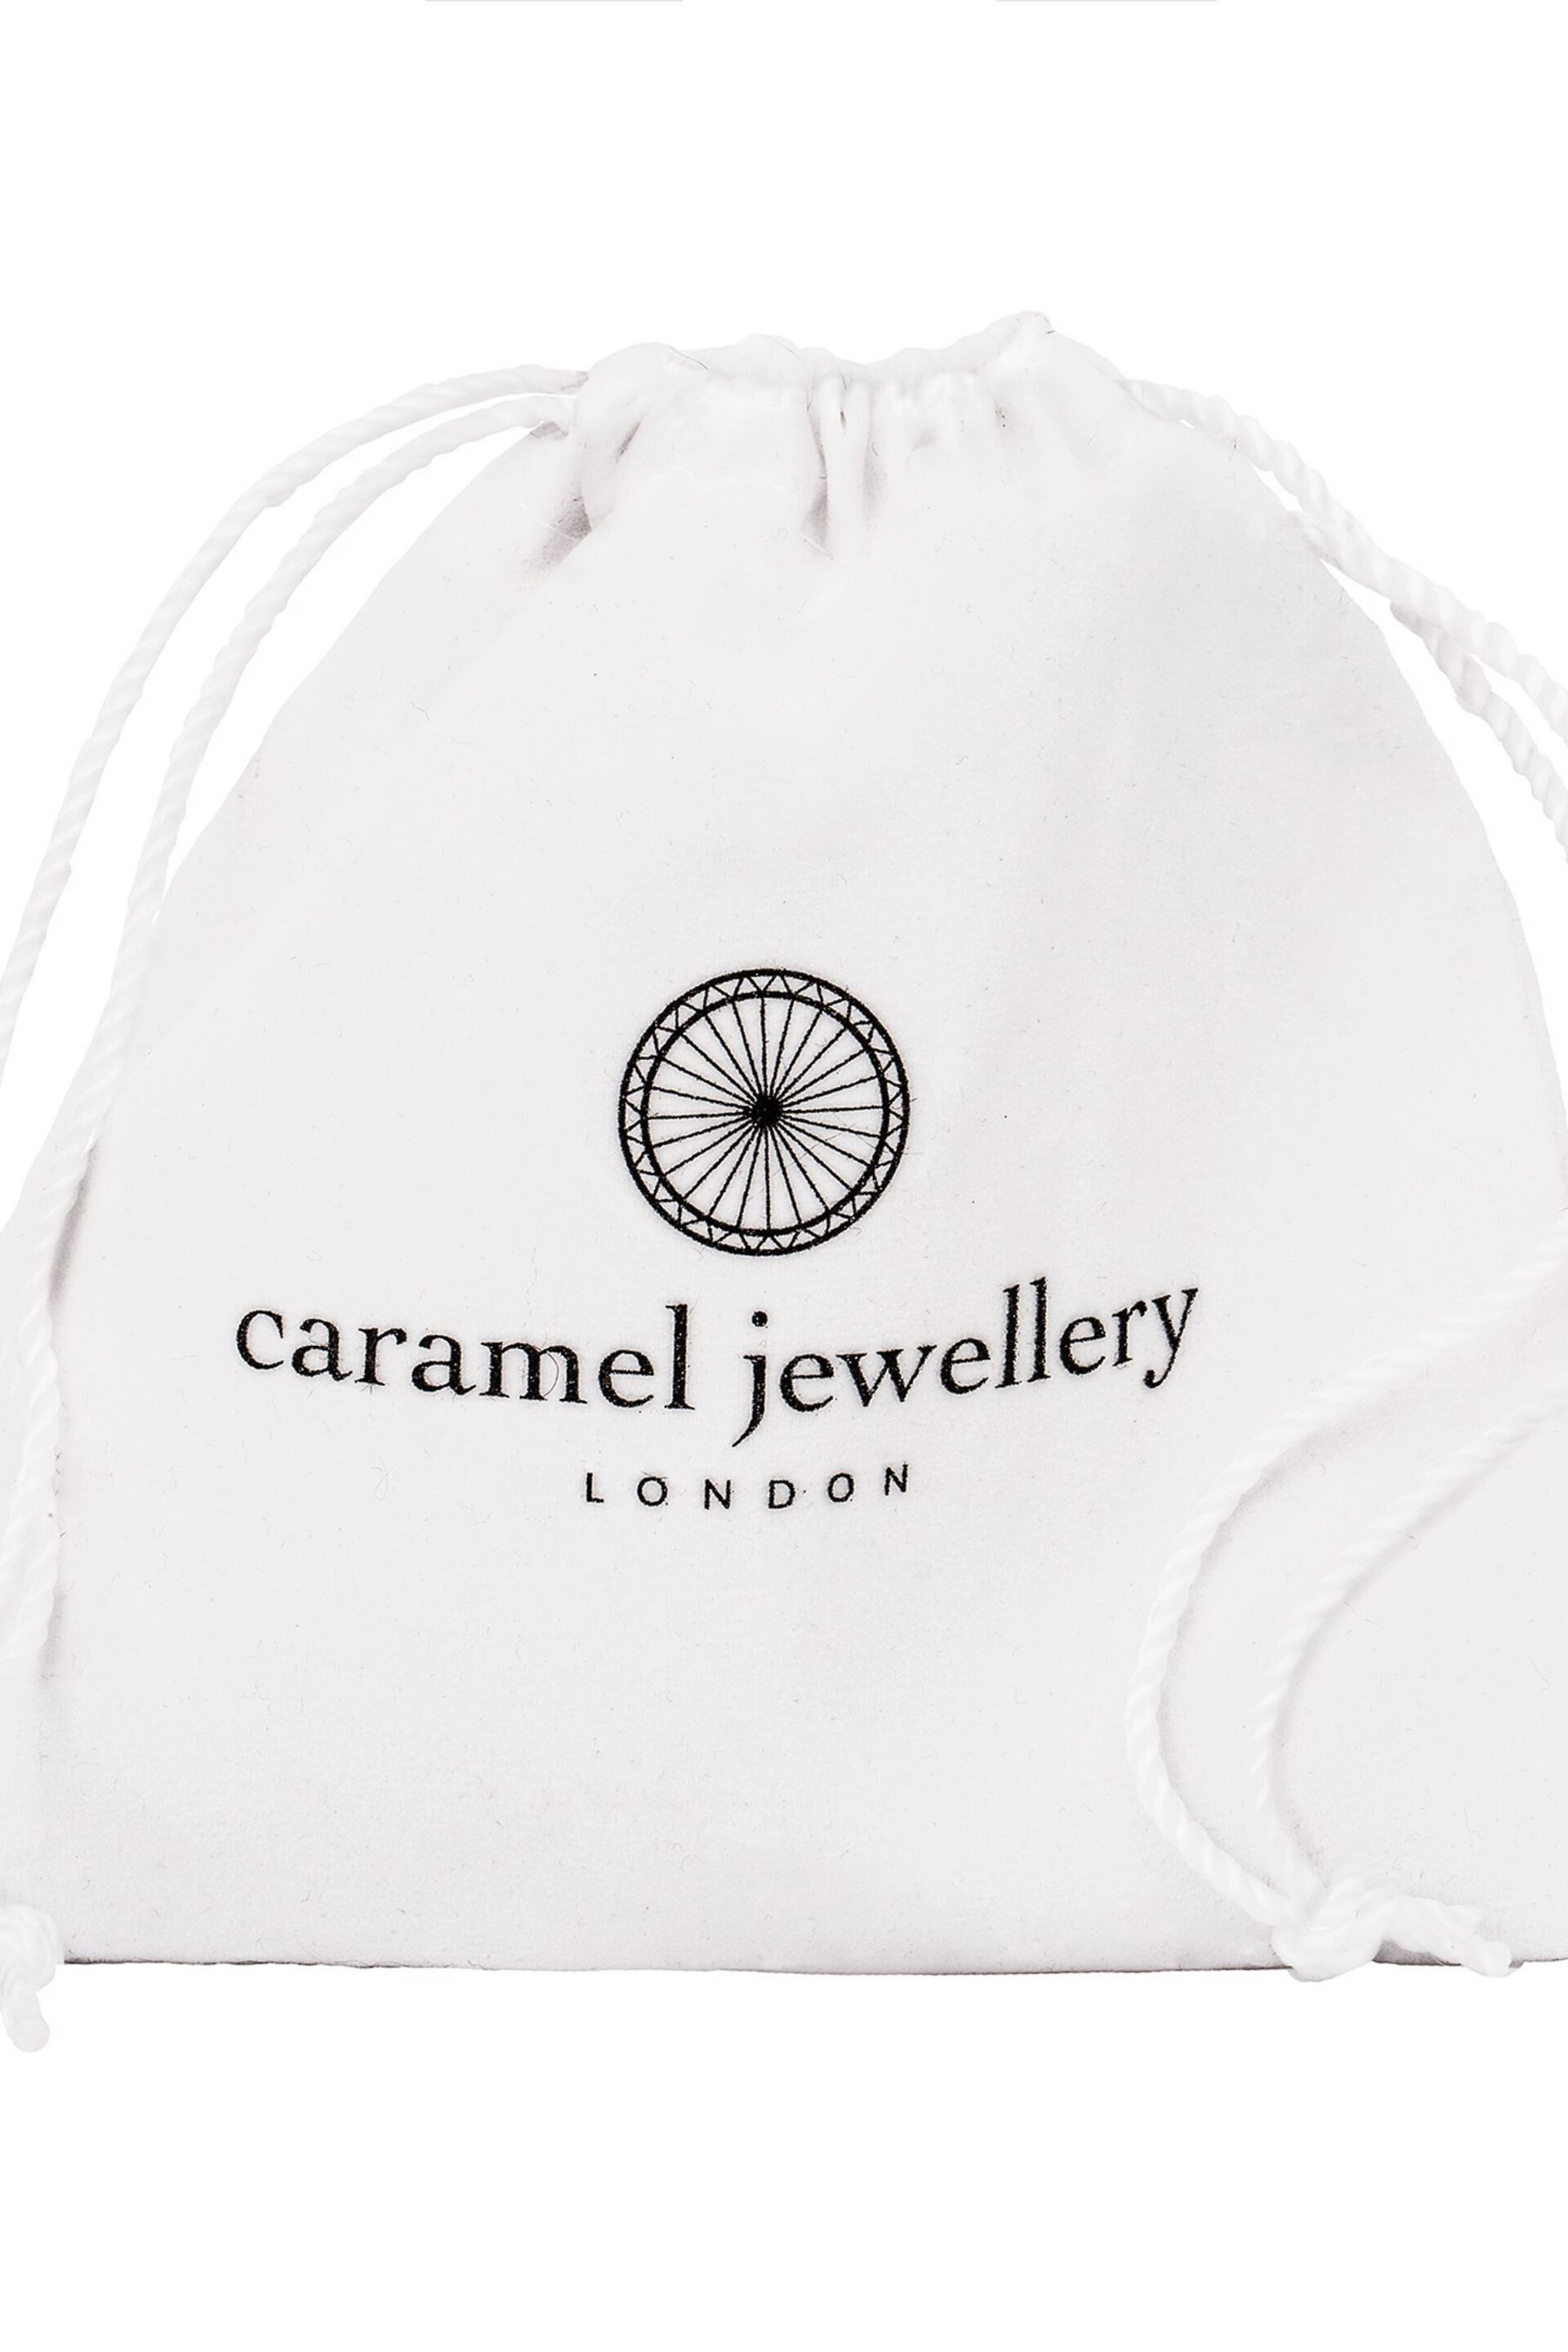 Caramel Jewellery London Silver Tone Sparkly Hoop Entwined Double Layer Charm Necklace - Image 6 of 6